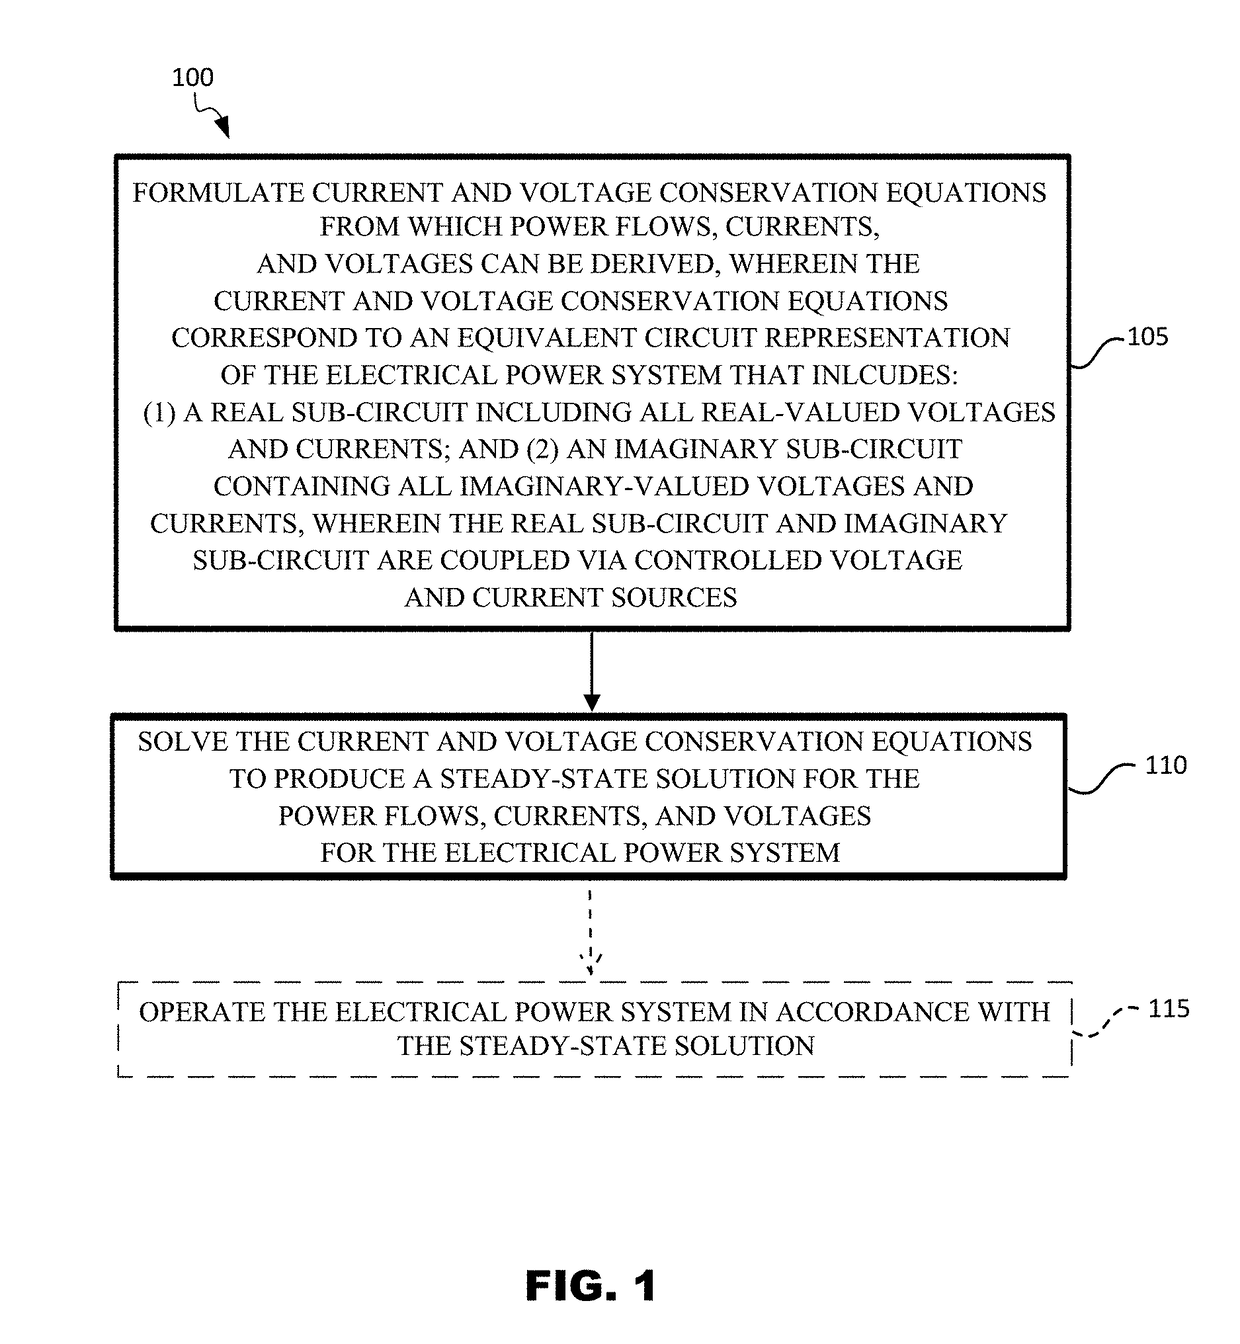 Systems, Methods, and Software for Planning, Simulating, and Operating Electrical Power Systems